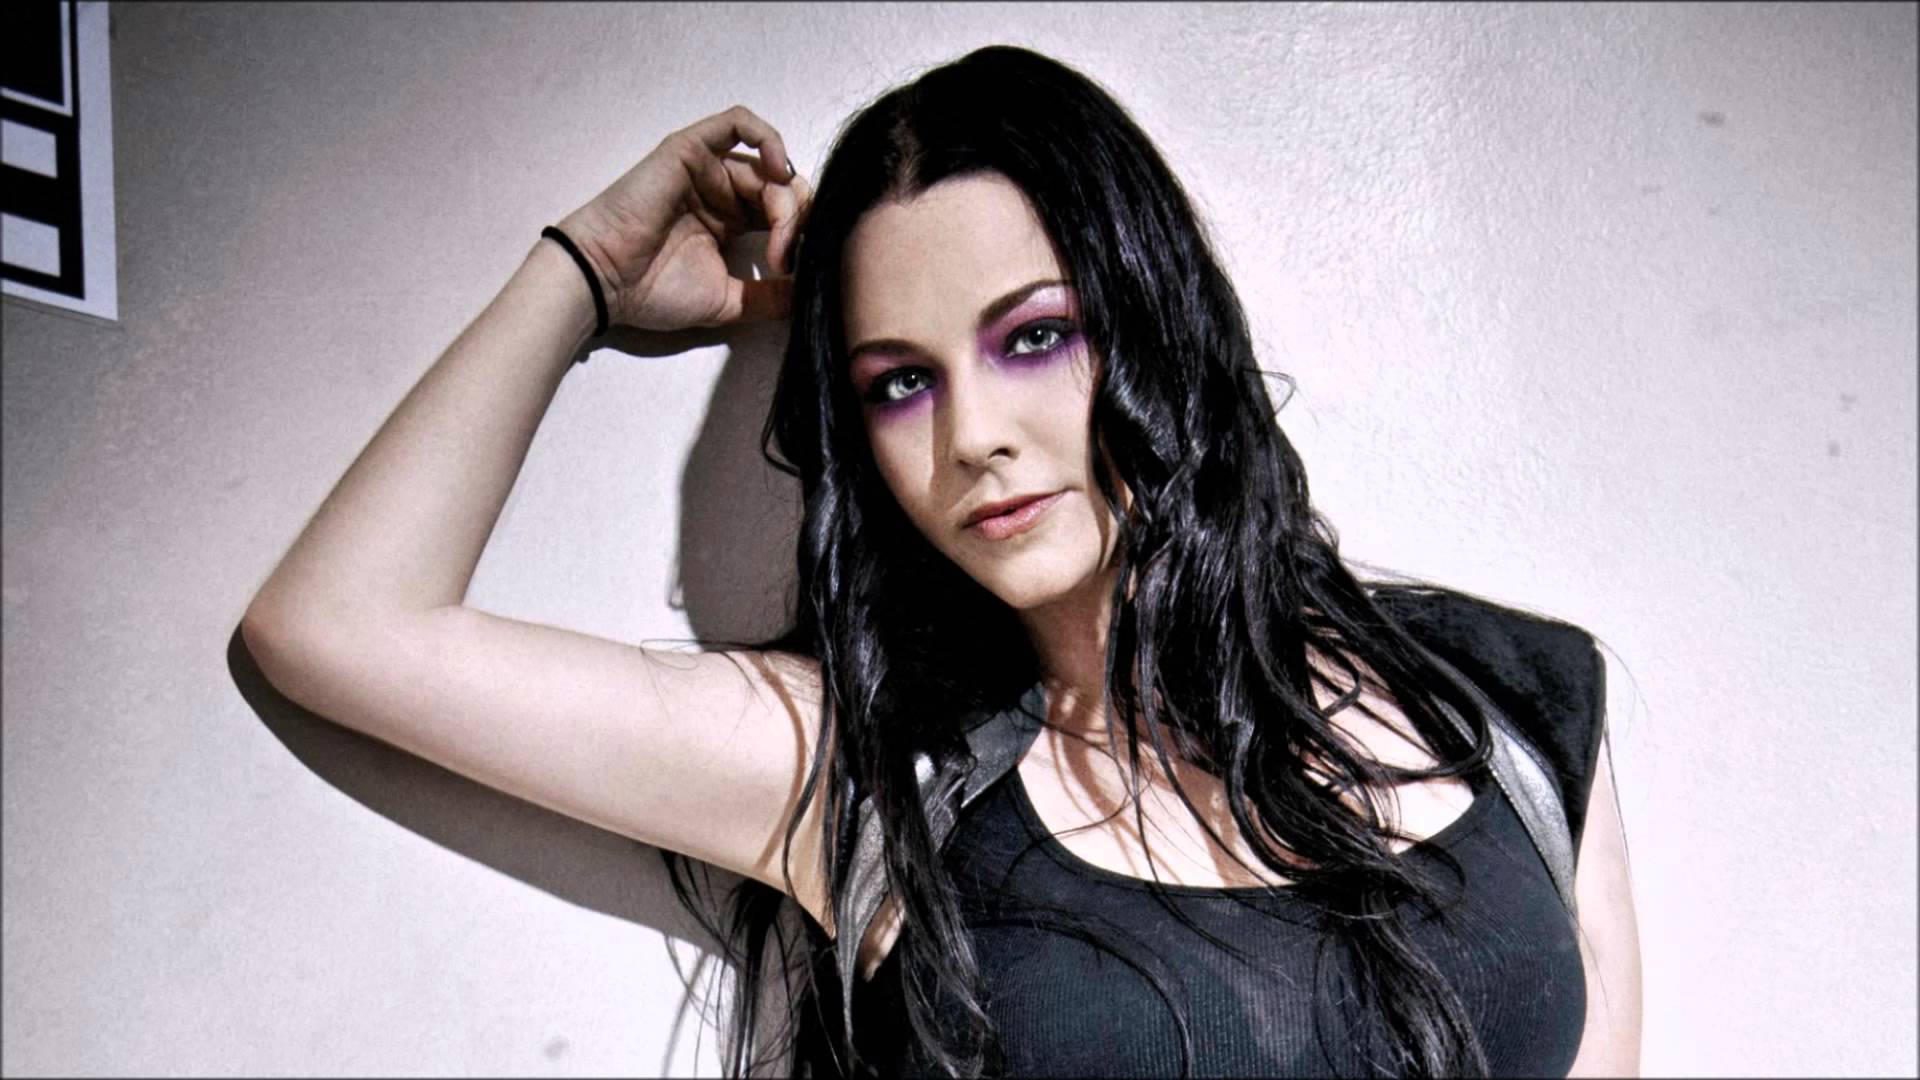 102.9 The Buzz Rock. sQueeGee Interviews Amy Lee of Evanescence